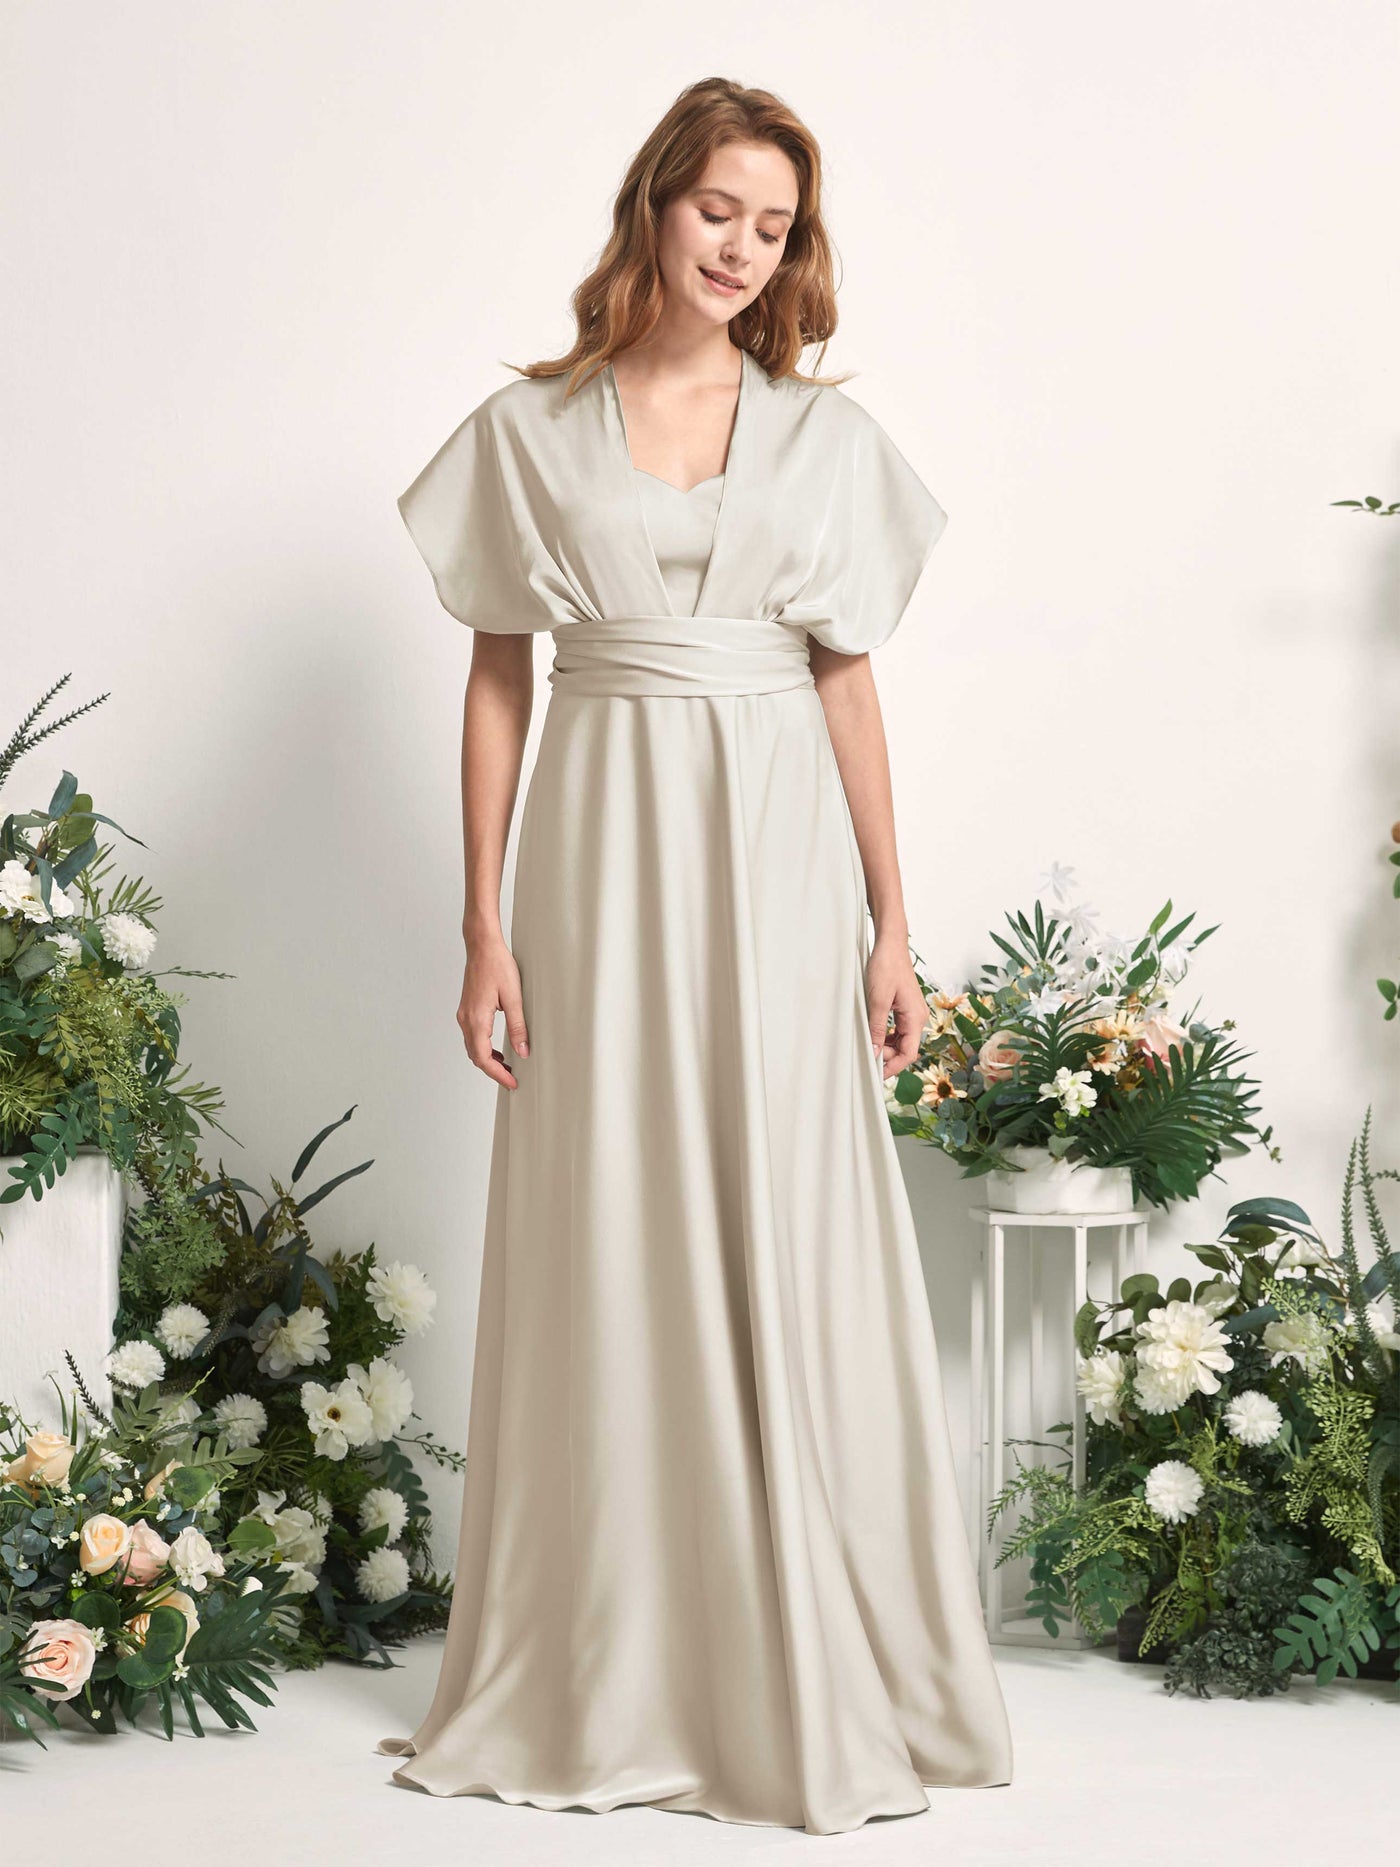 Champagne Bridesmaid Dresses Bridesmaid Dress A-line Satin Halter Full Length Short Sleeves Wedding Party Dress (81226404)#color_champagne